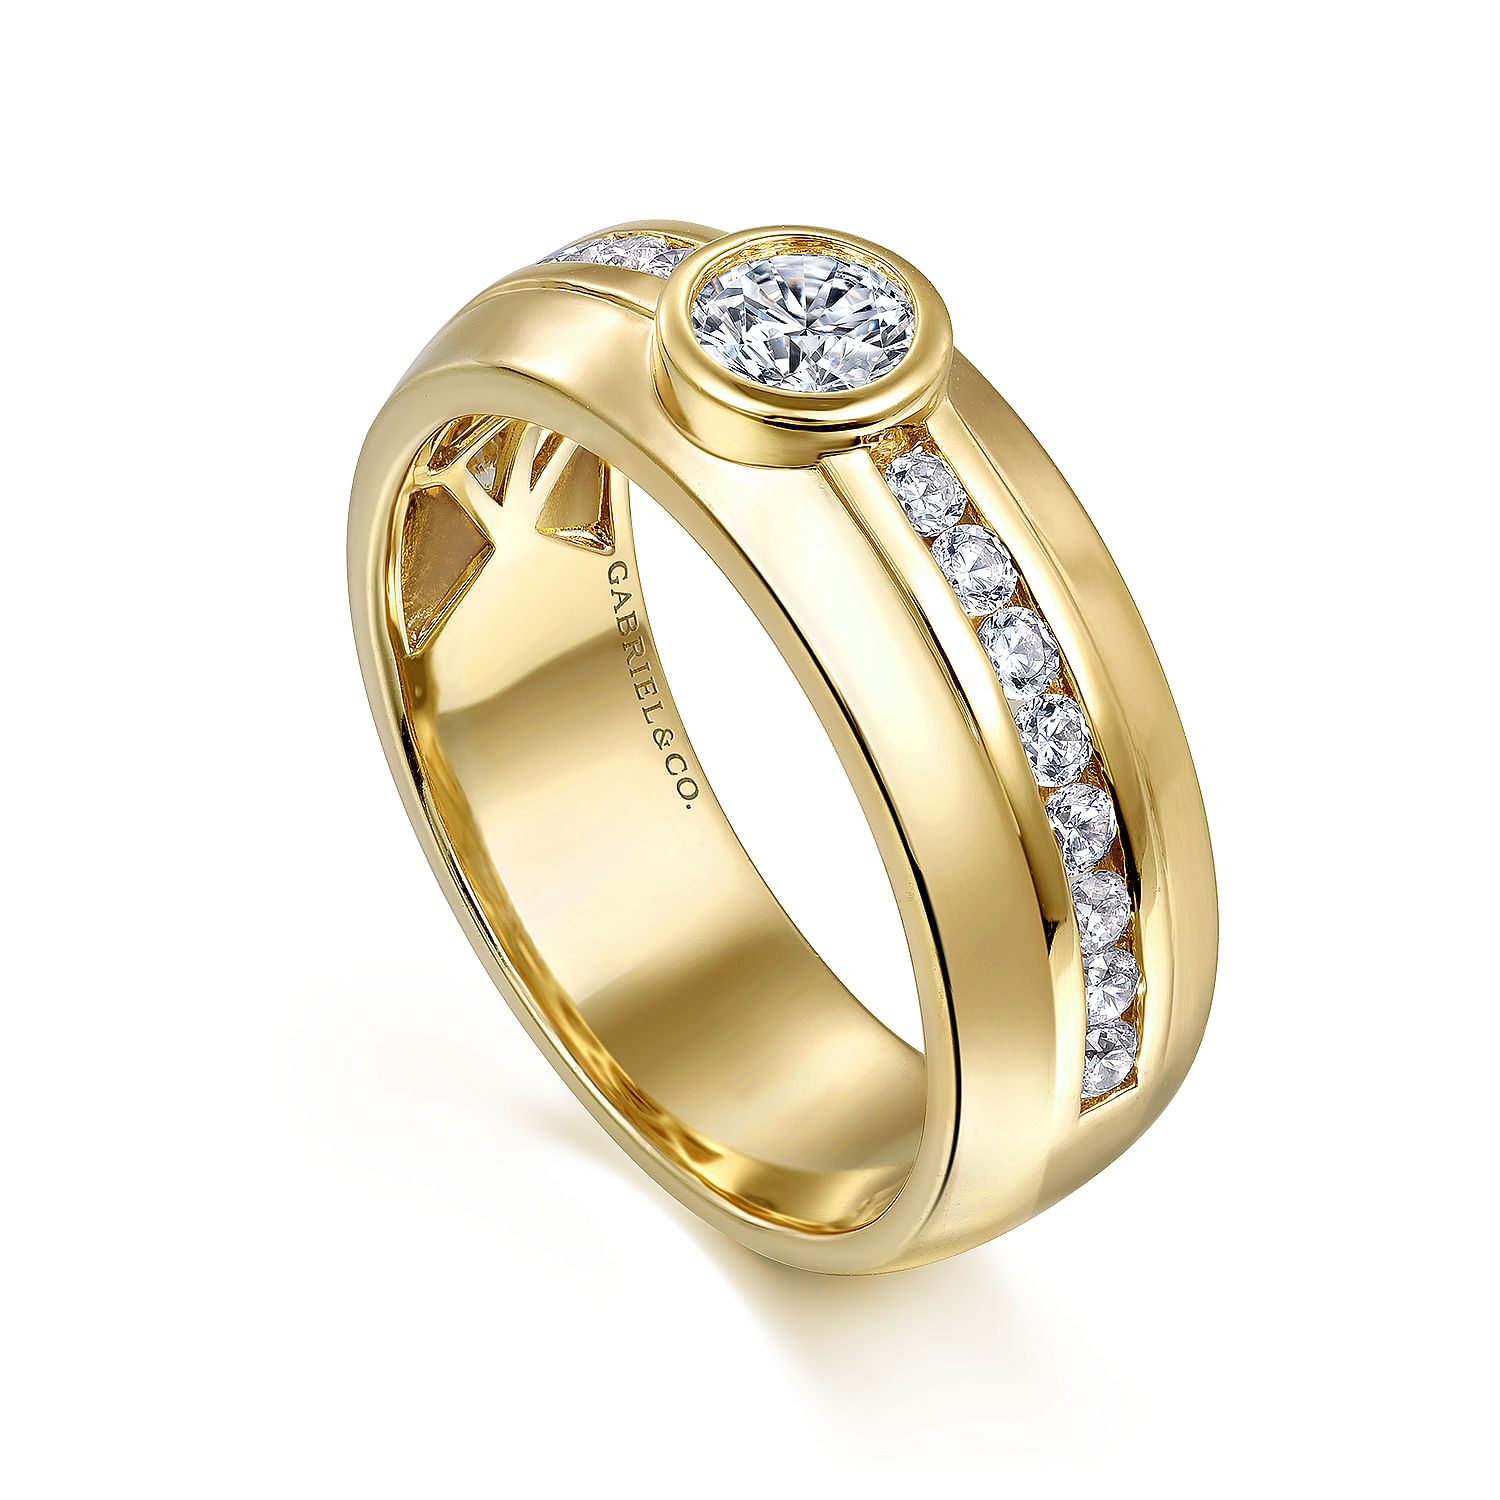 14K Yellow Gold Diamond Mens Engagement Ring in High Polished Finish